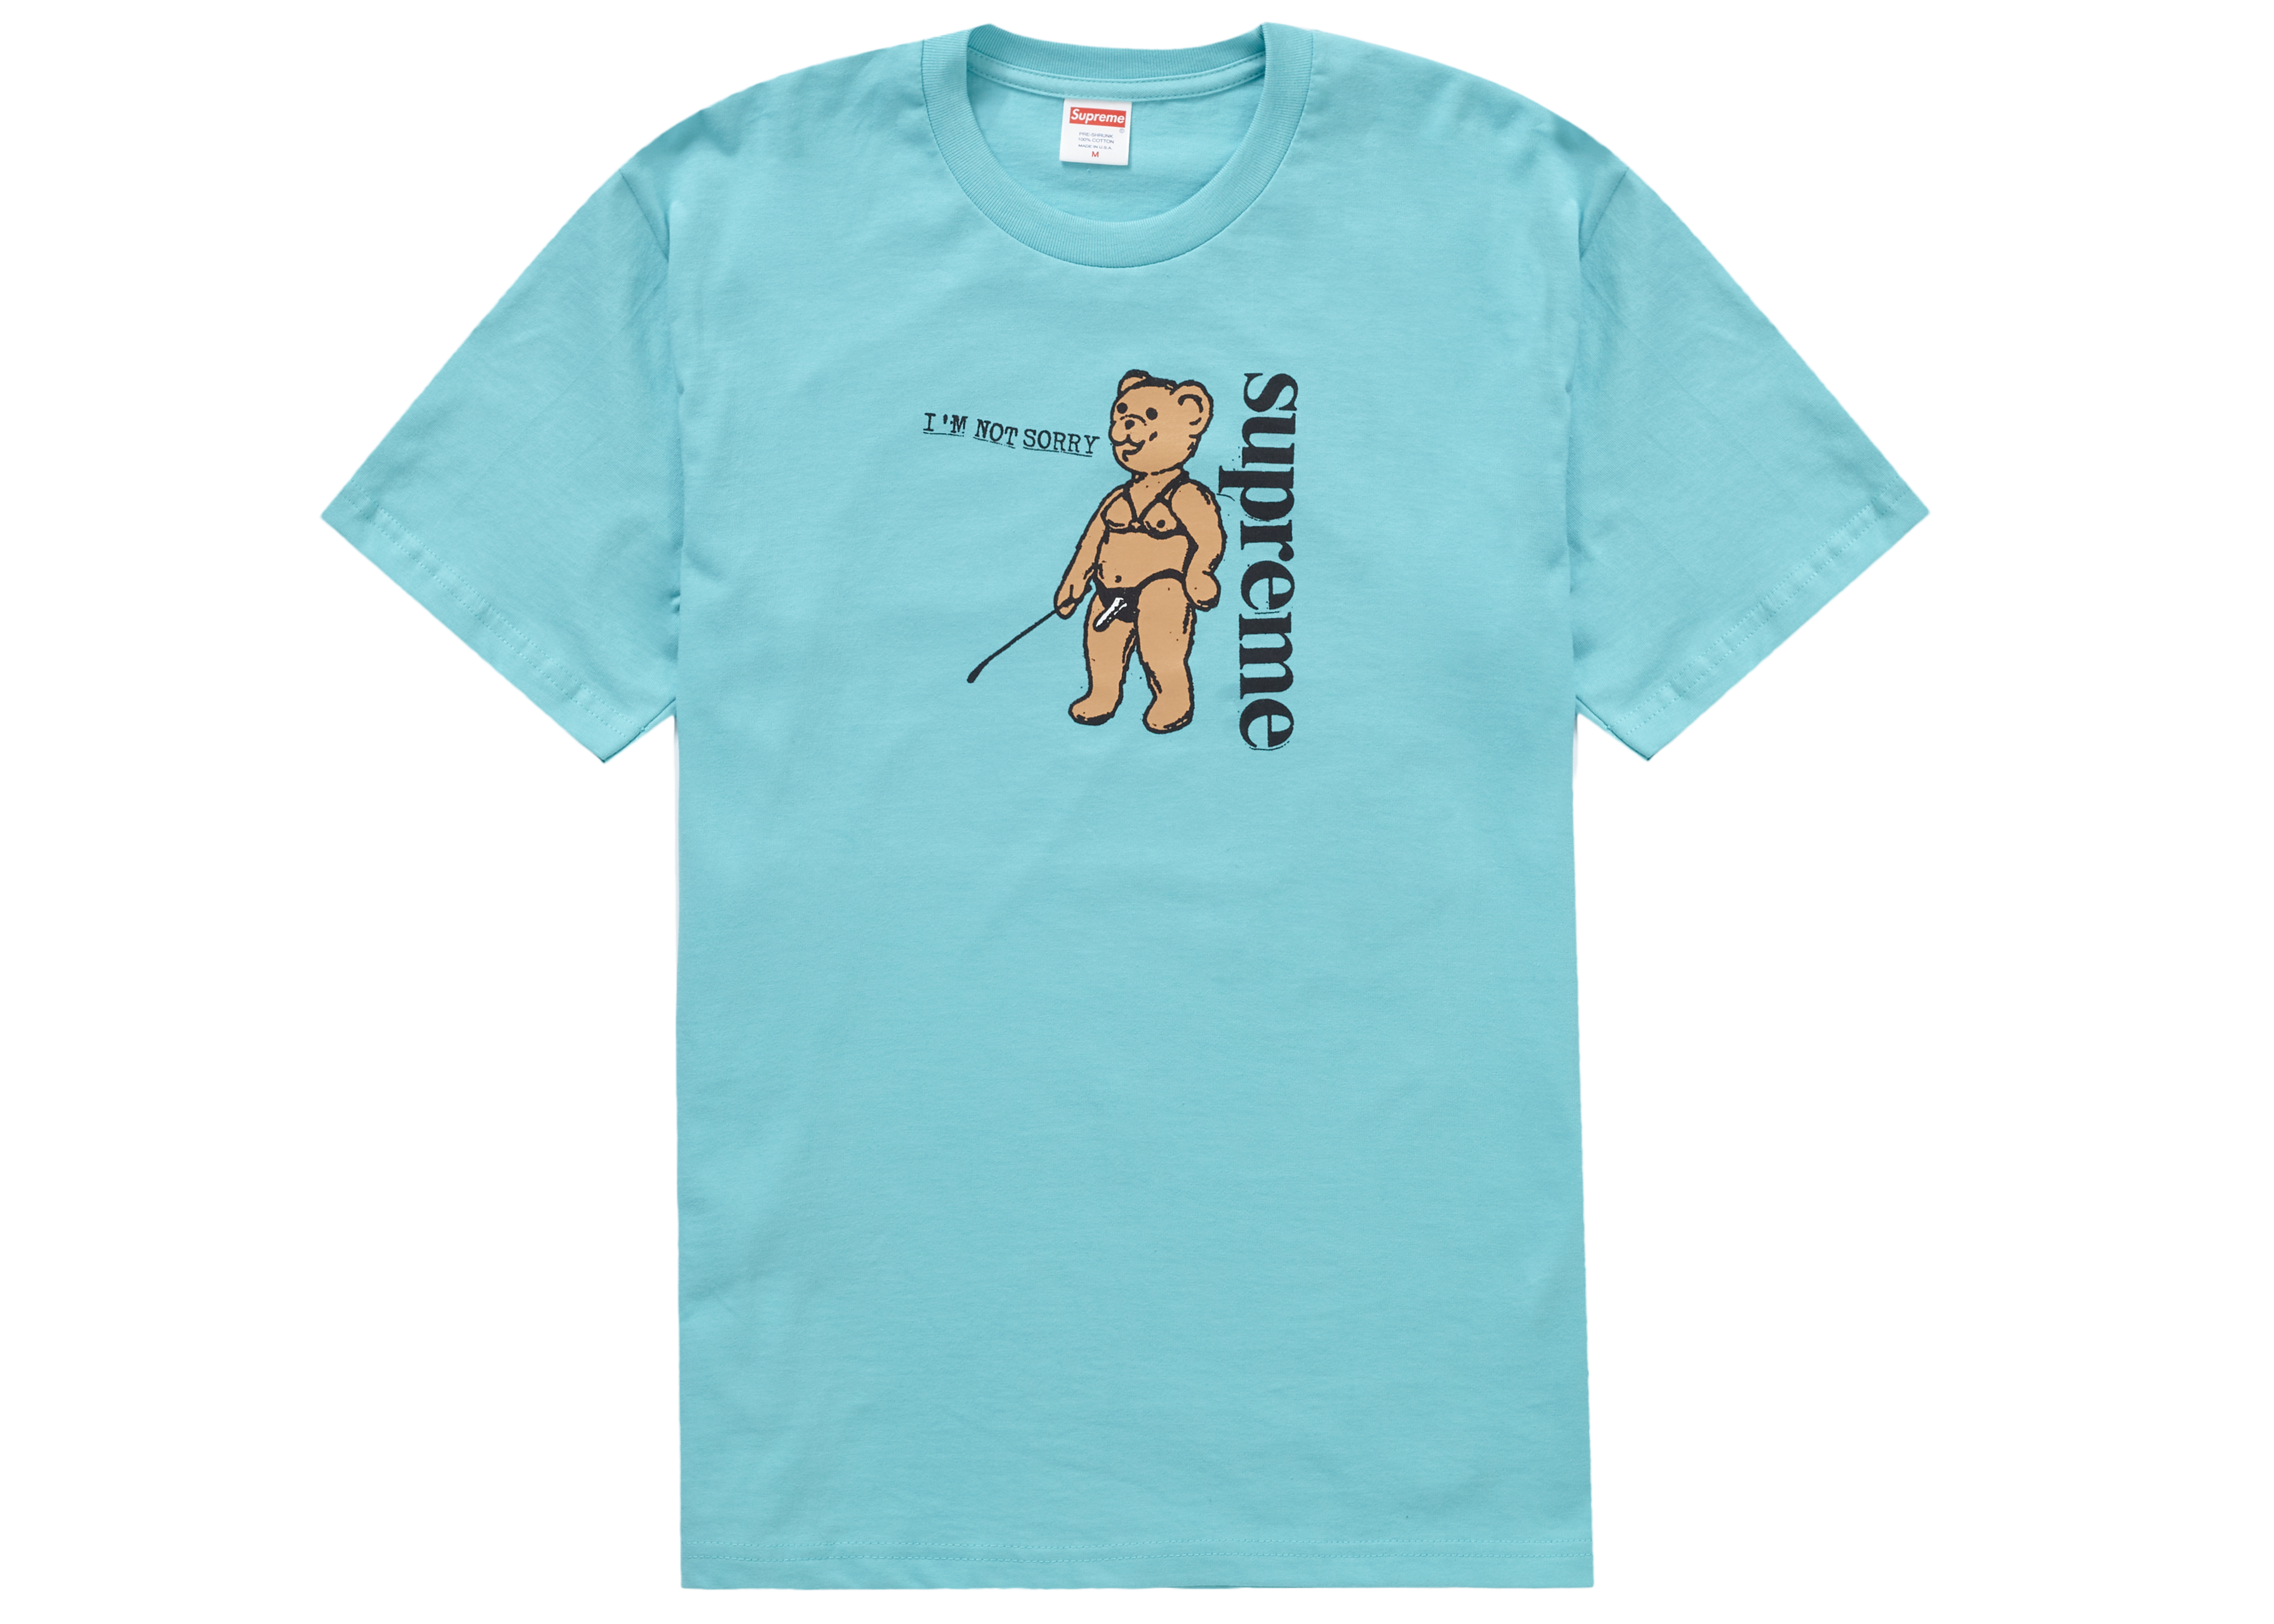 Supreme Not Sorry Tee Light Teal - SS21 - US